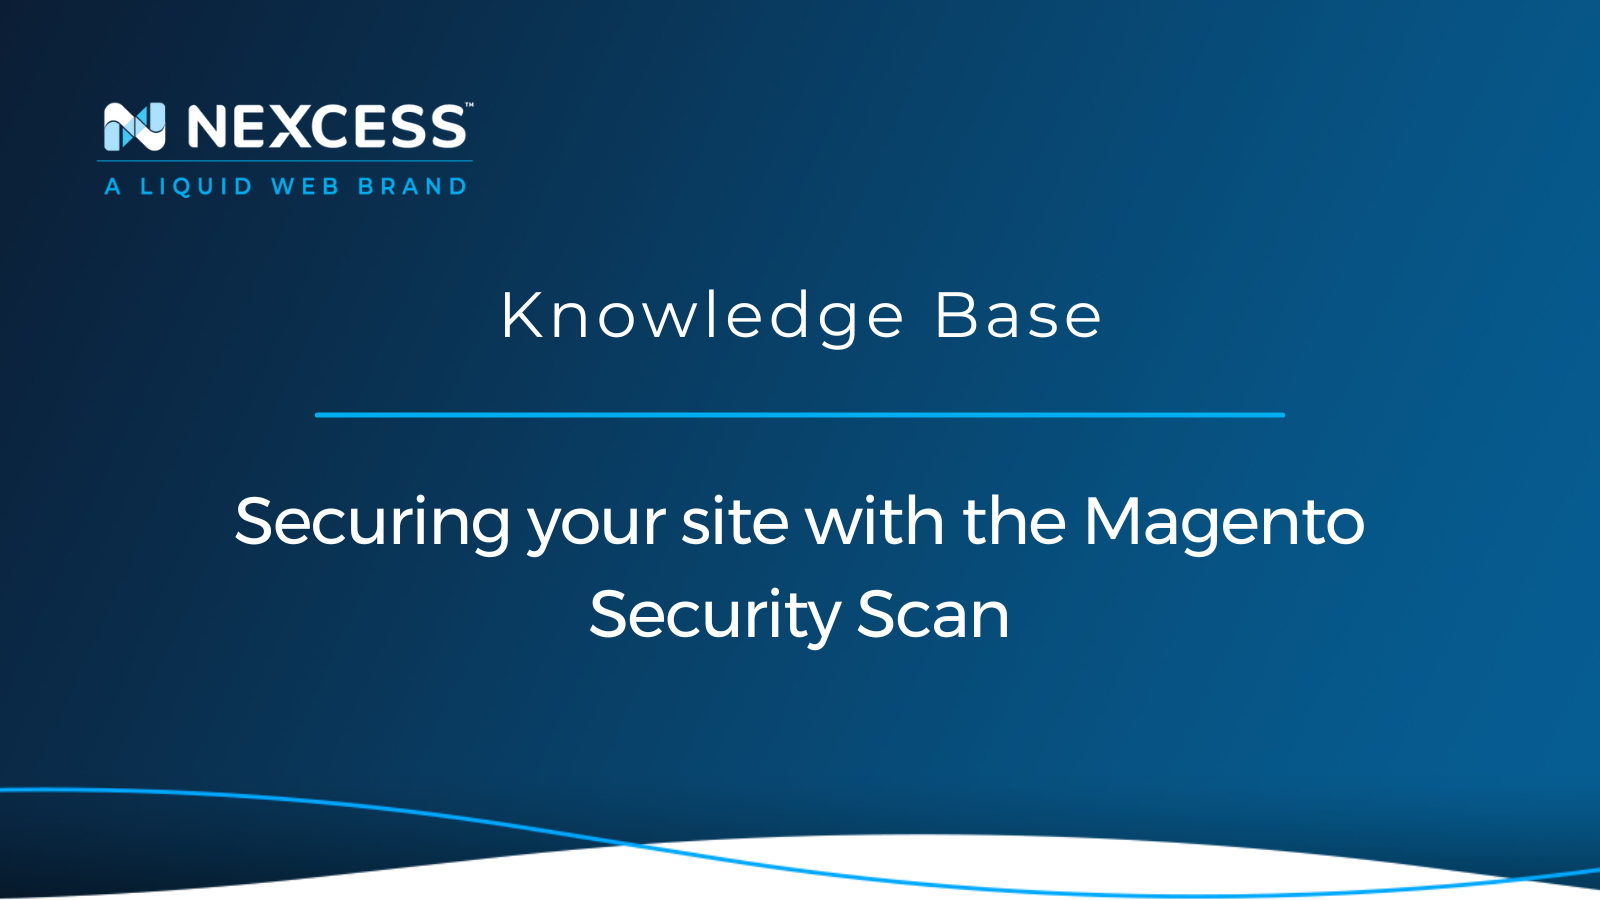 Securing your site with the Magento Security Scan